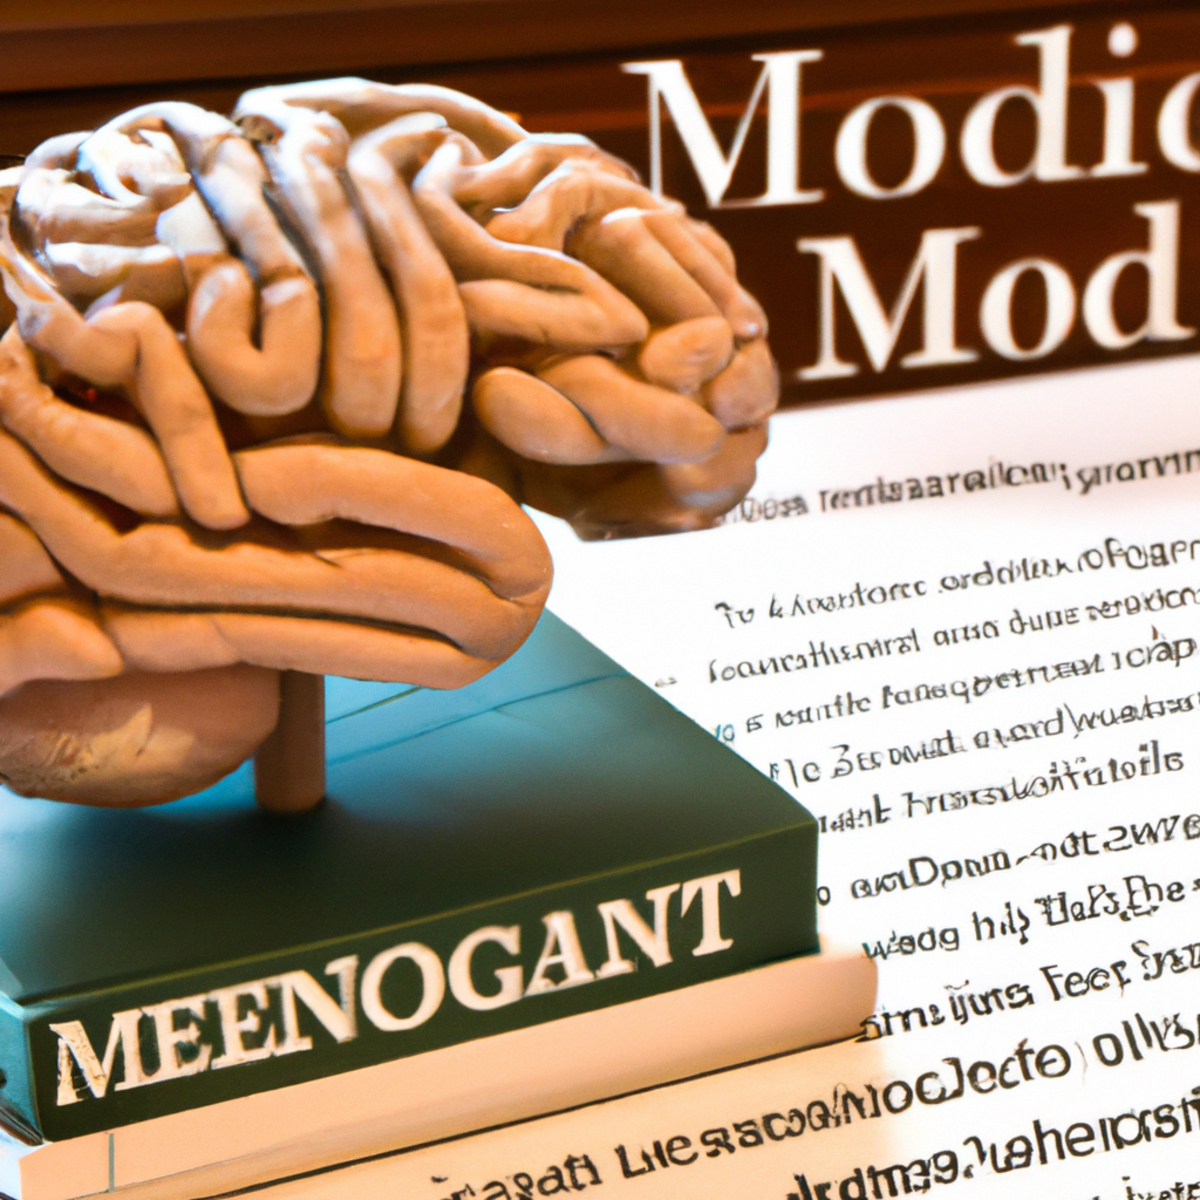 Close-up of lifelike brain model on modern desk, surrounded by medical texts, symbolizing scientific exploration of Niemann-Pick Disease's impact on nervous system.